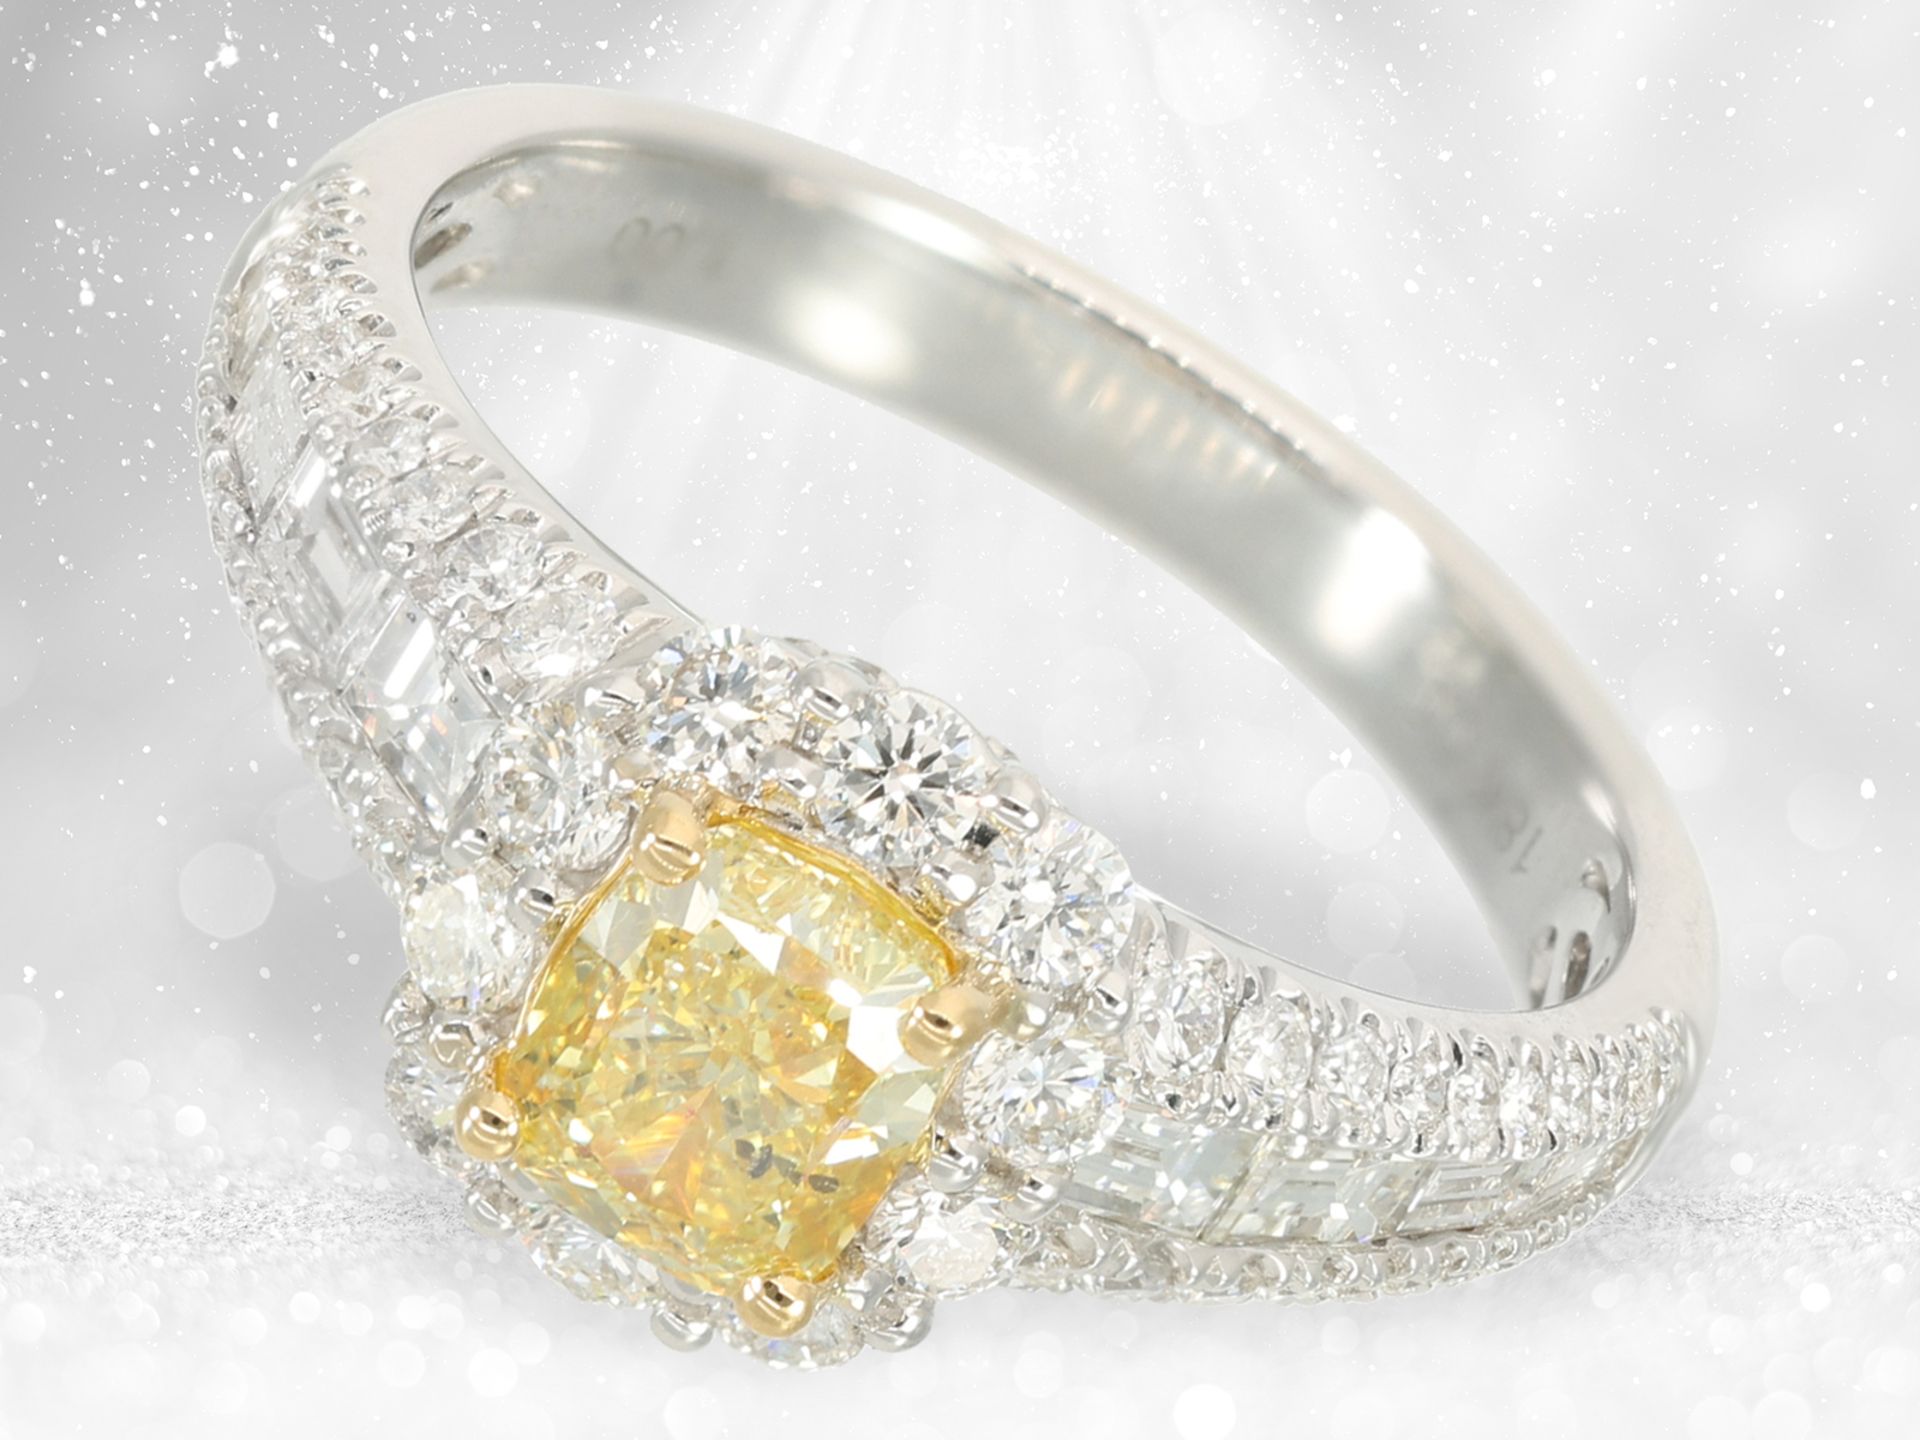 Ring: elaborately designed diamond ring, centre stone Fancy Yellow 1ct, GIA certificate - Image 2 of 4